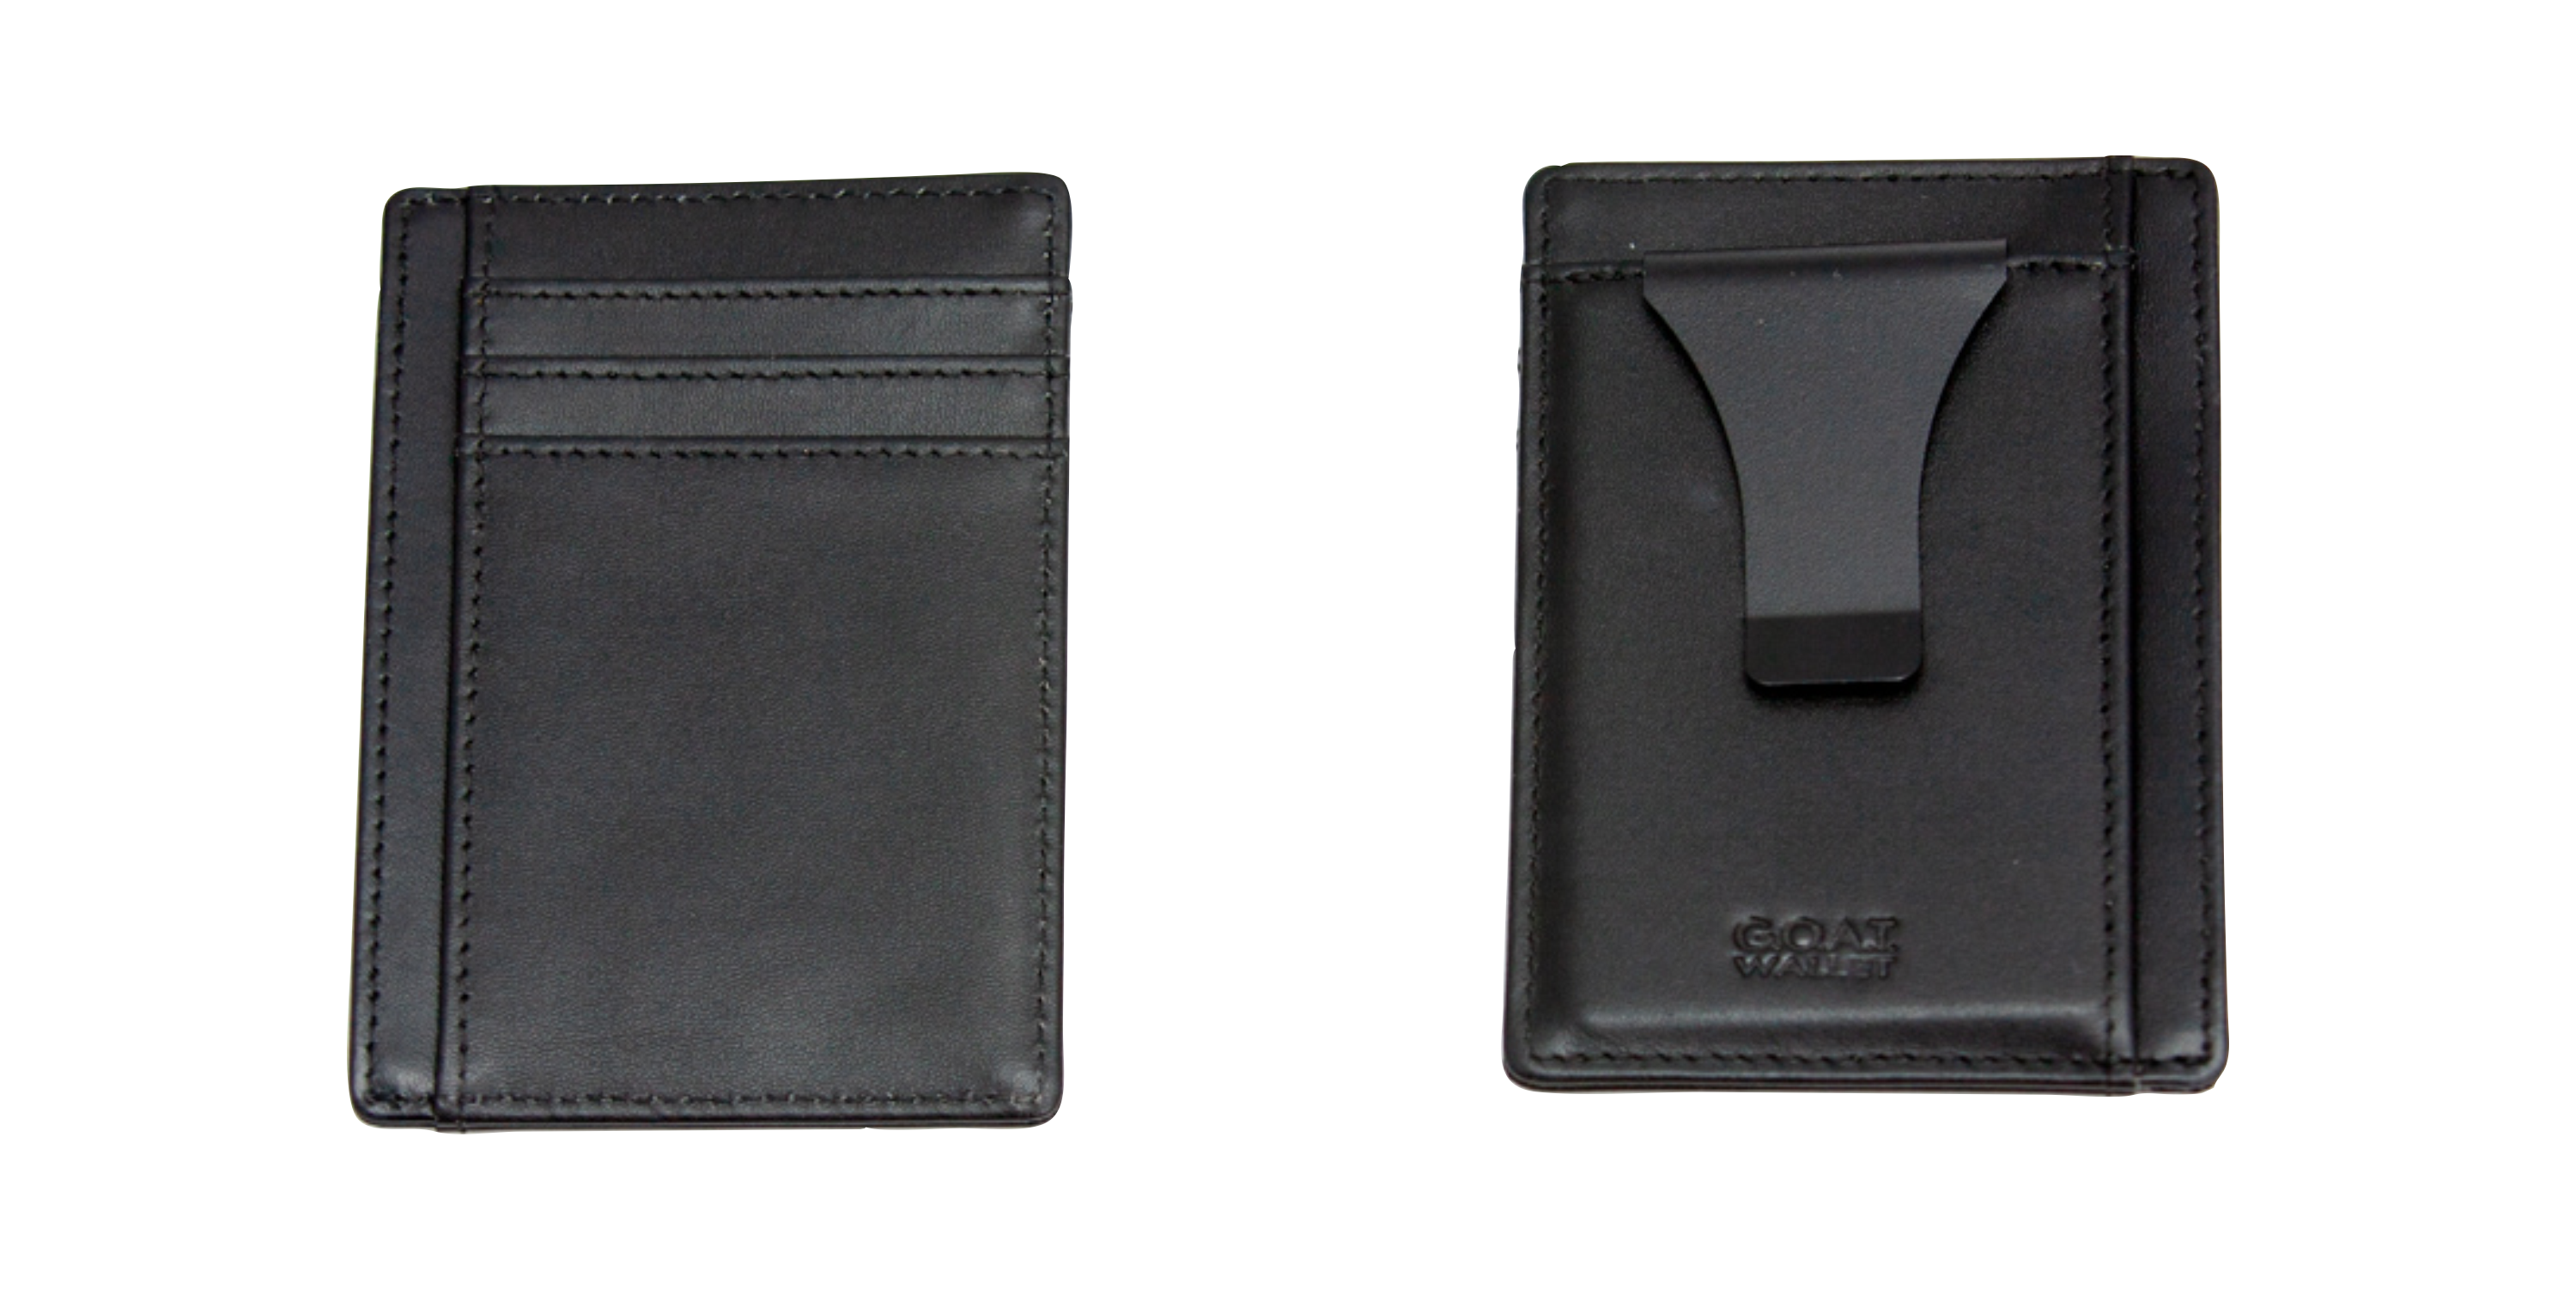 Introducing the GOAT Wallet by Perfect Etch  --  www.PerfectEtch.com